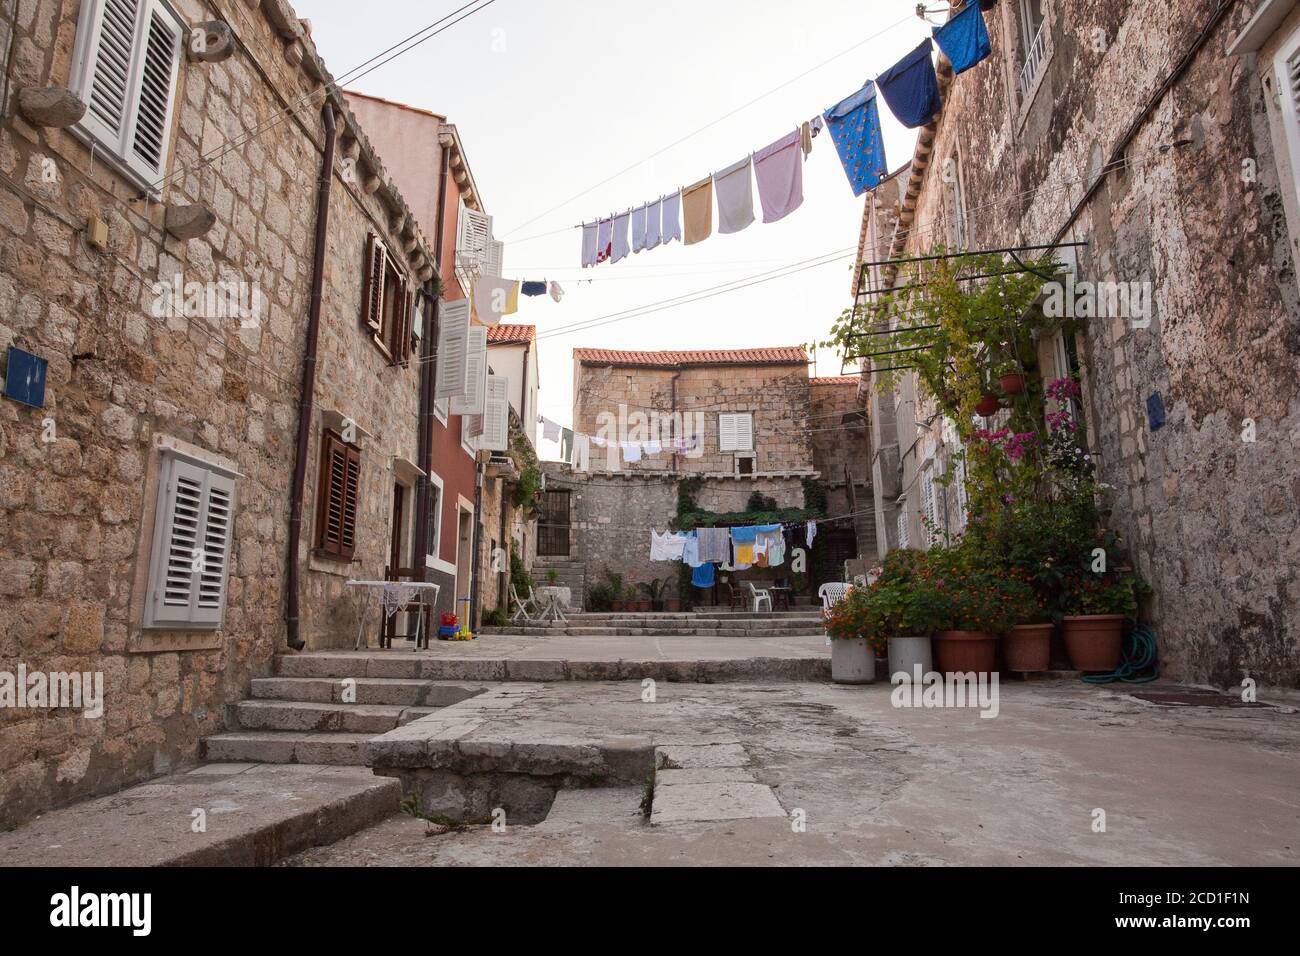 Washing lines in an alley in Dubrovnik. Clothes hanging to dry on the rope. Laundry hanging between houses in old European city Stock Photo